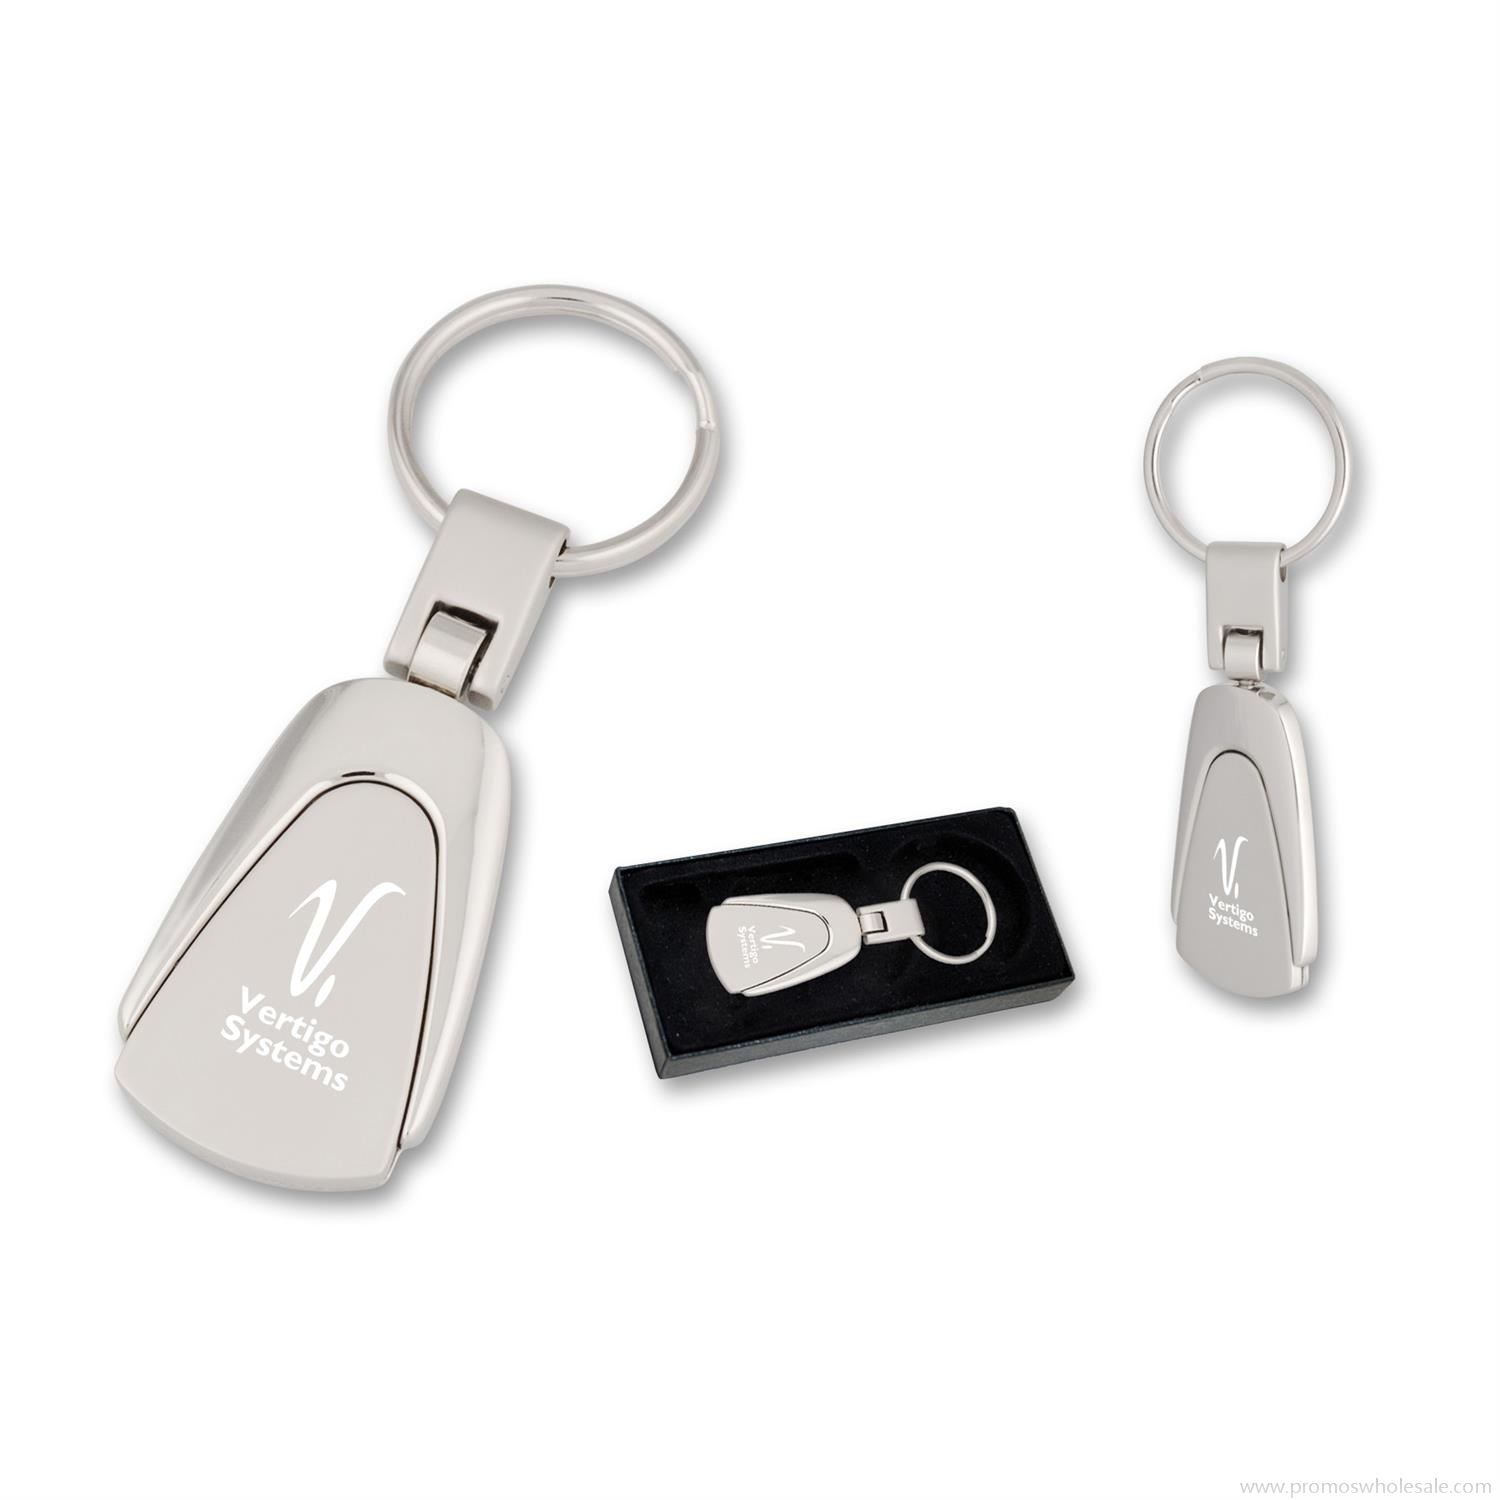 V for Victory Keychain